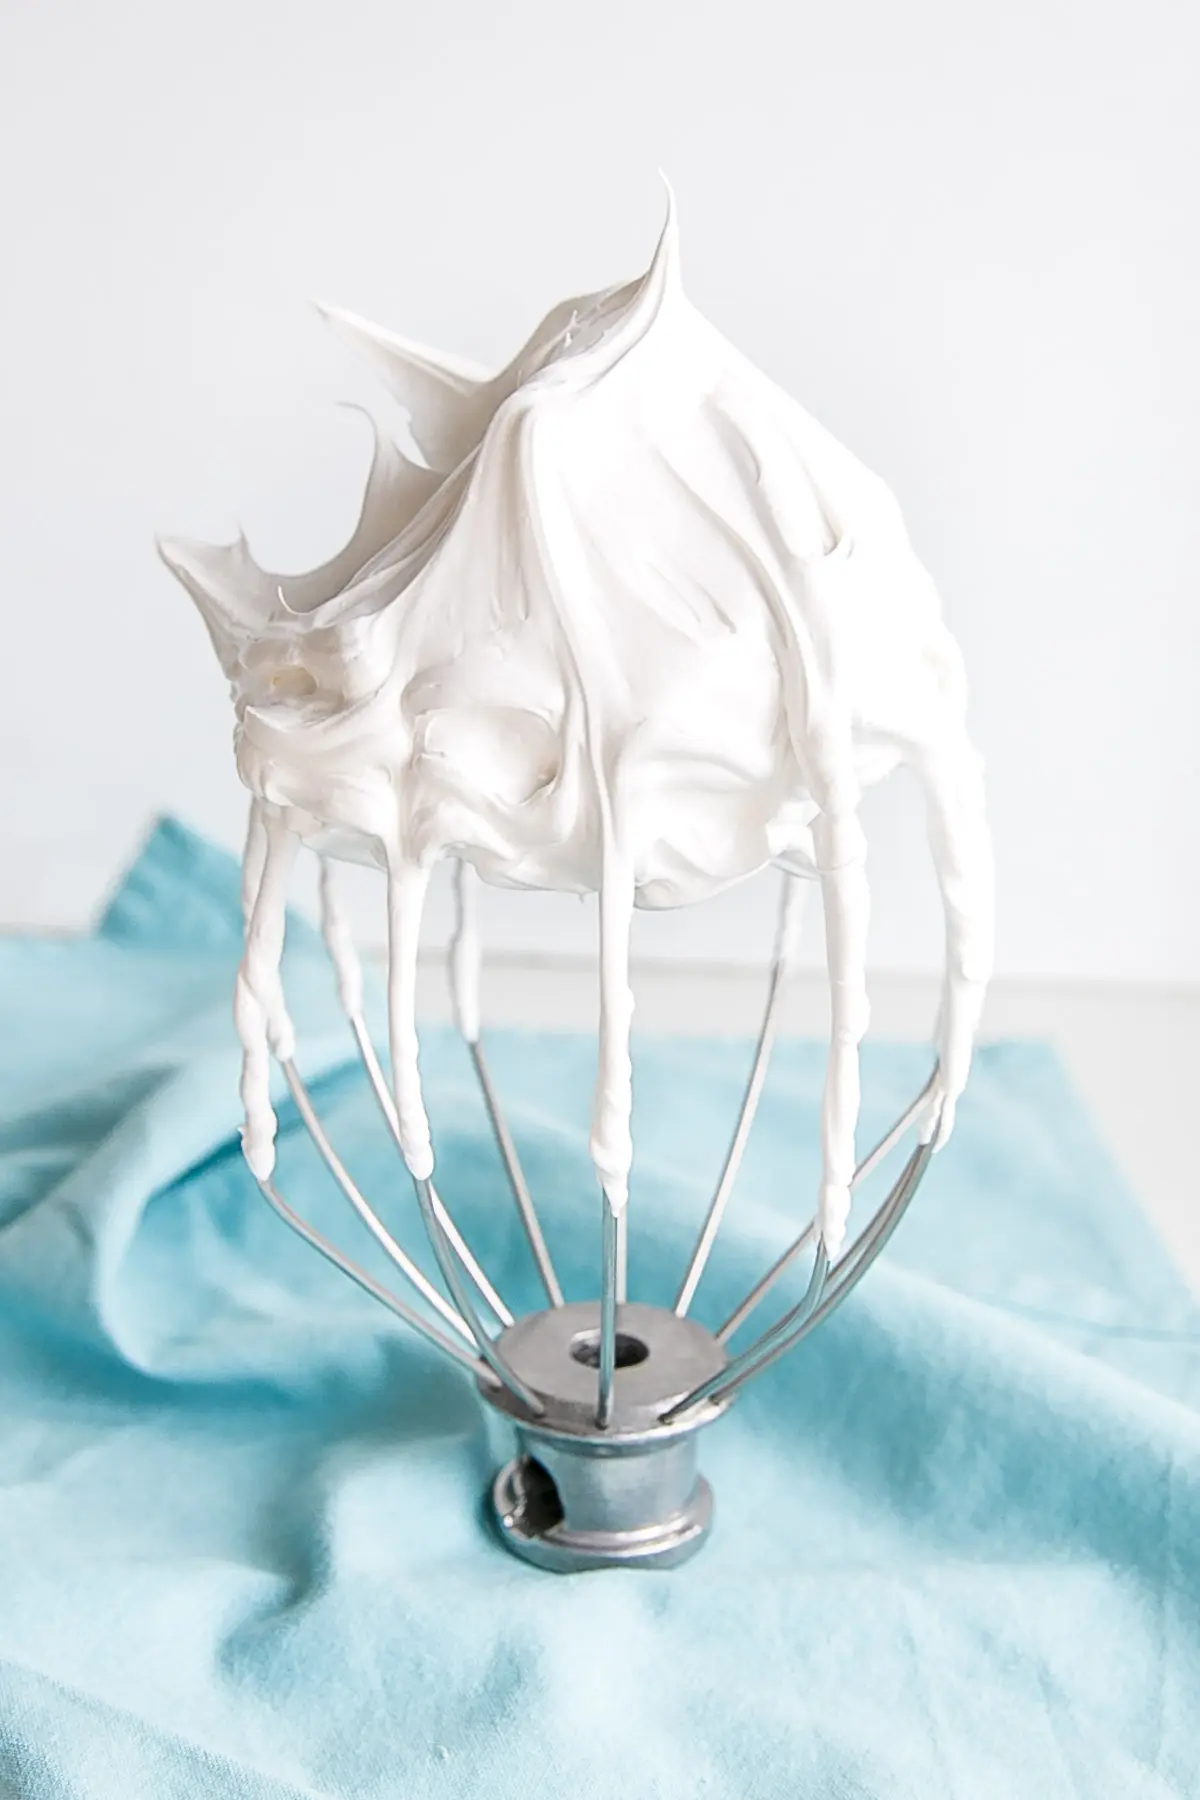 Seven minute frosting on a stand mixer whisk on a blue cloth.